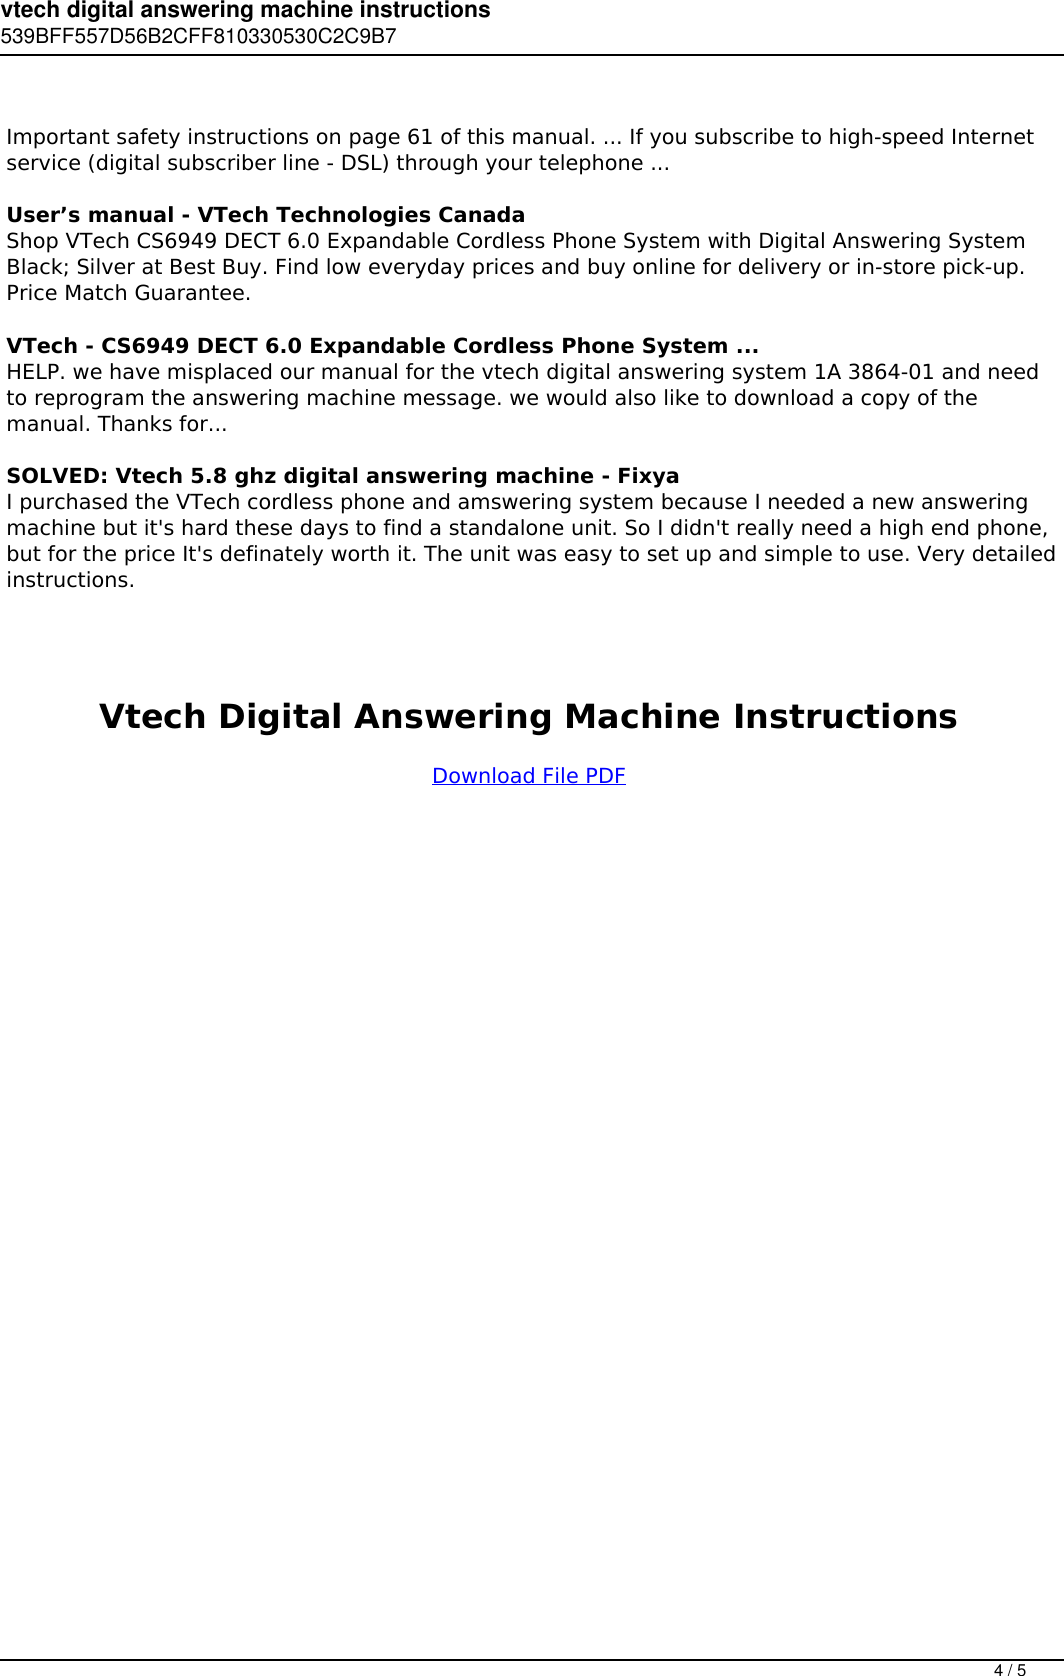 Page 4 of 5 - Vtech Digital Answering Machine Instructions